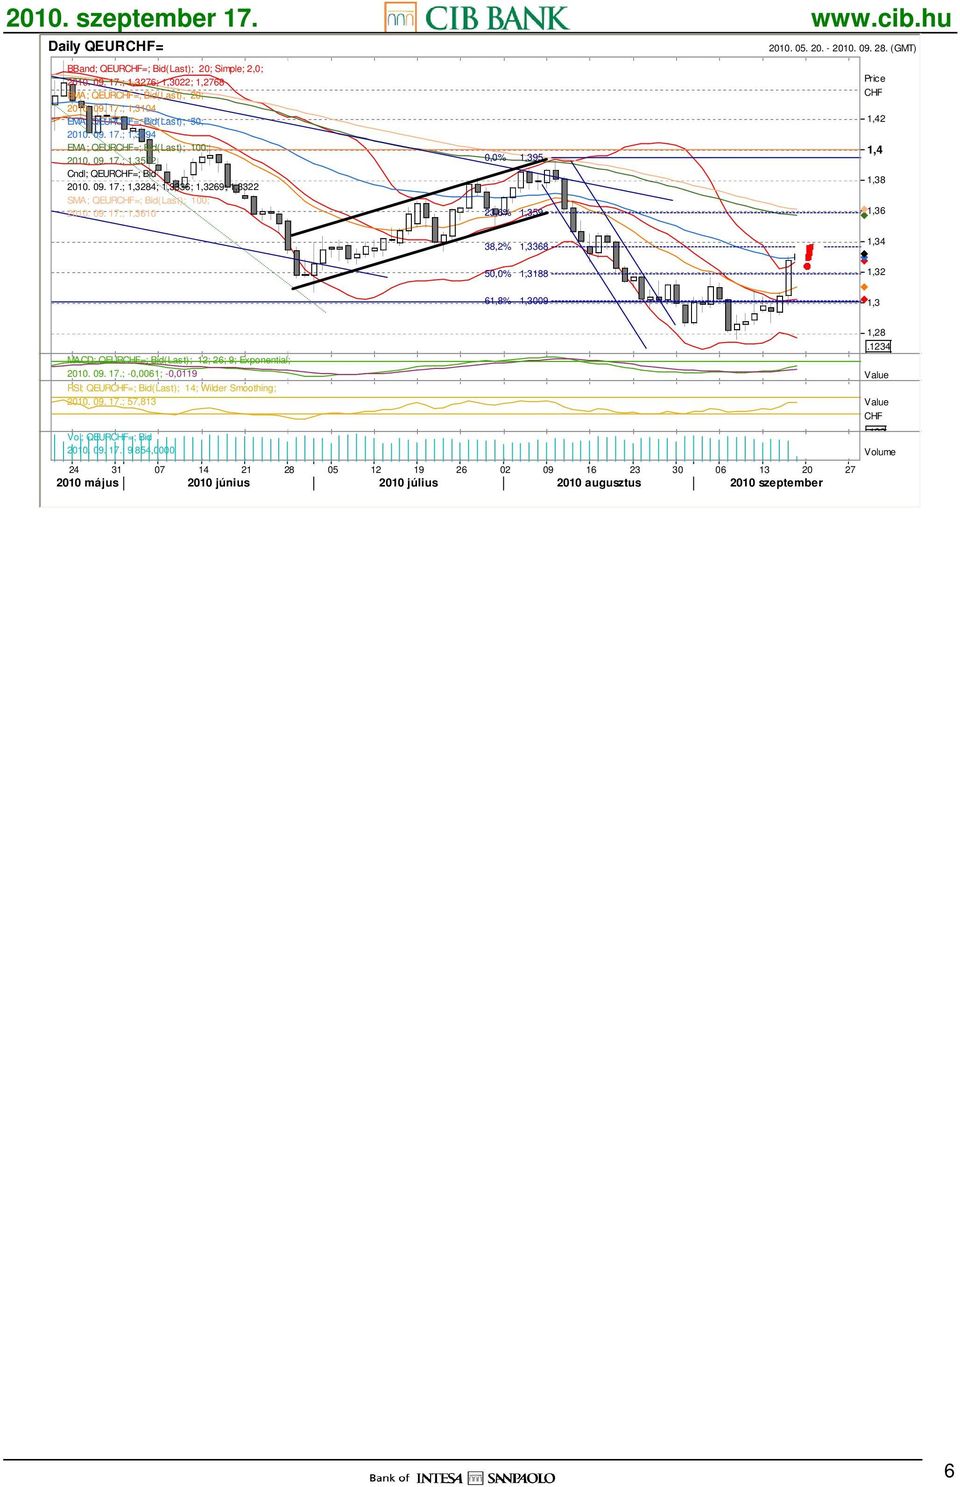 (GMT) Price CHF 1,42 1,4 1,38 1,36 38,2% 50,0% 61,8% 1,3368 88 1,3009 1,34 1,32 1,3.1234 MACD; QEURCHF=; Bid(Last); 12; 26; 9; Exponential; 2010. 09. 17.